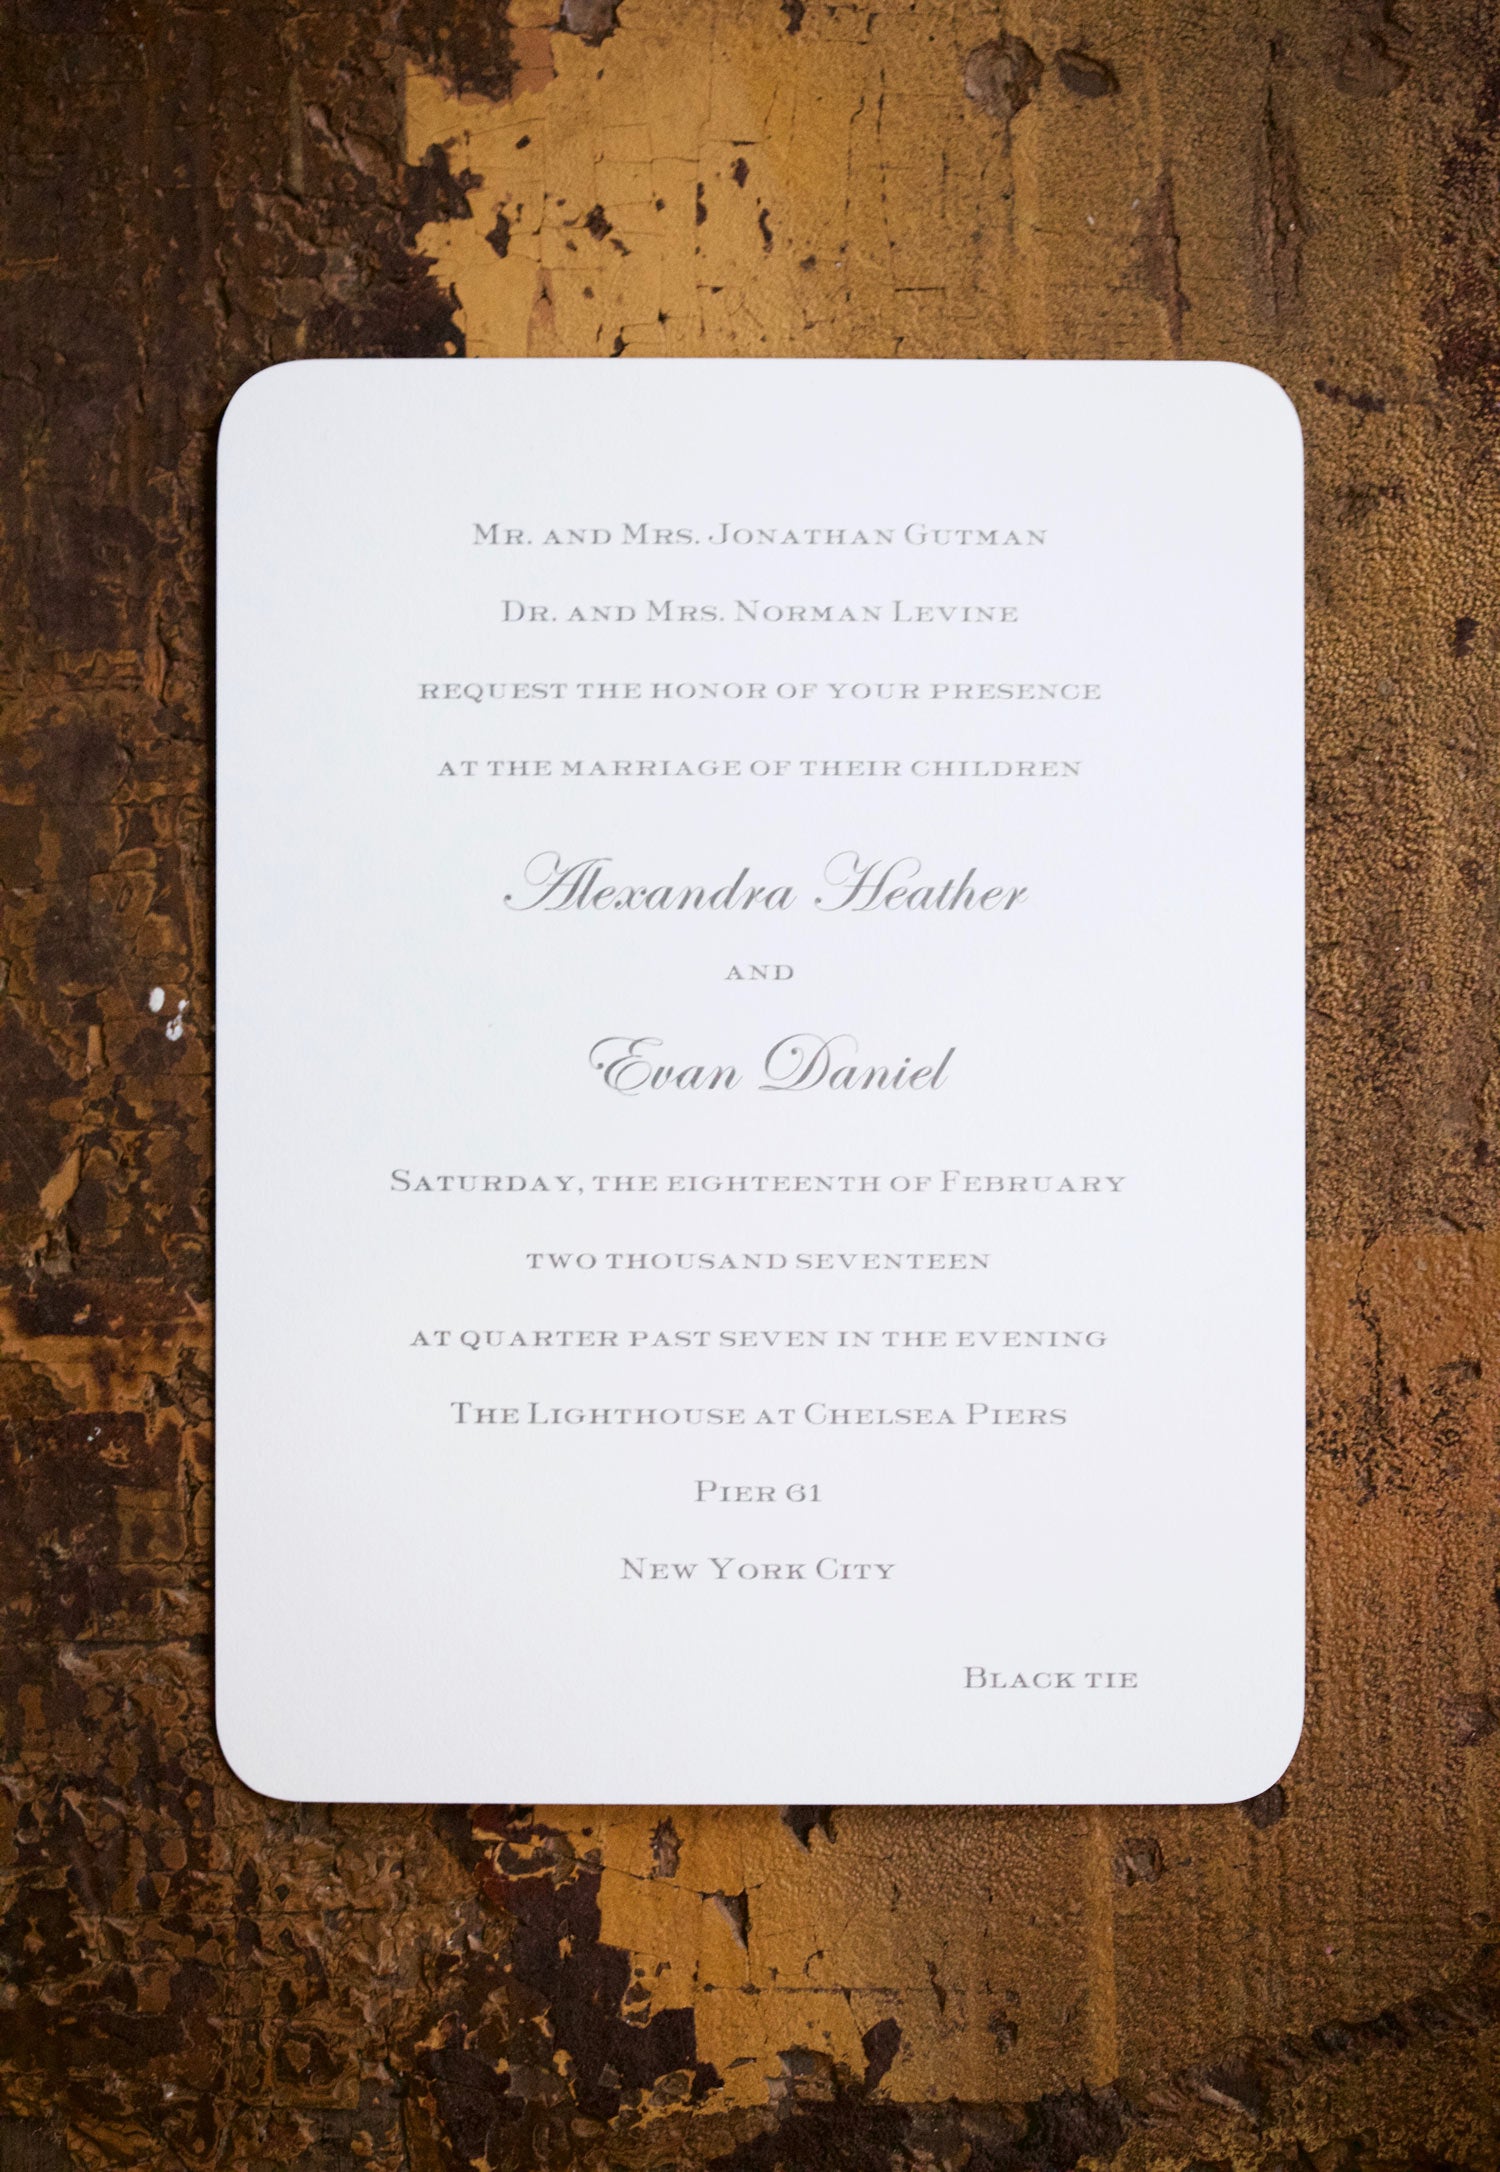 Alex & Evan is an engraved wedding suite set in NYC. Empire size natural white classic crest double thick paper in pewter ink with rounded corners and navy edge painting. Call us toll-free at 1-800-995-1549 or email us at hello@pickettspress.com